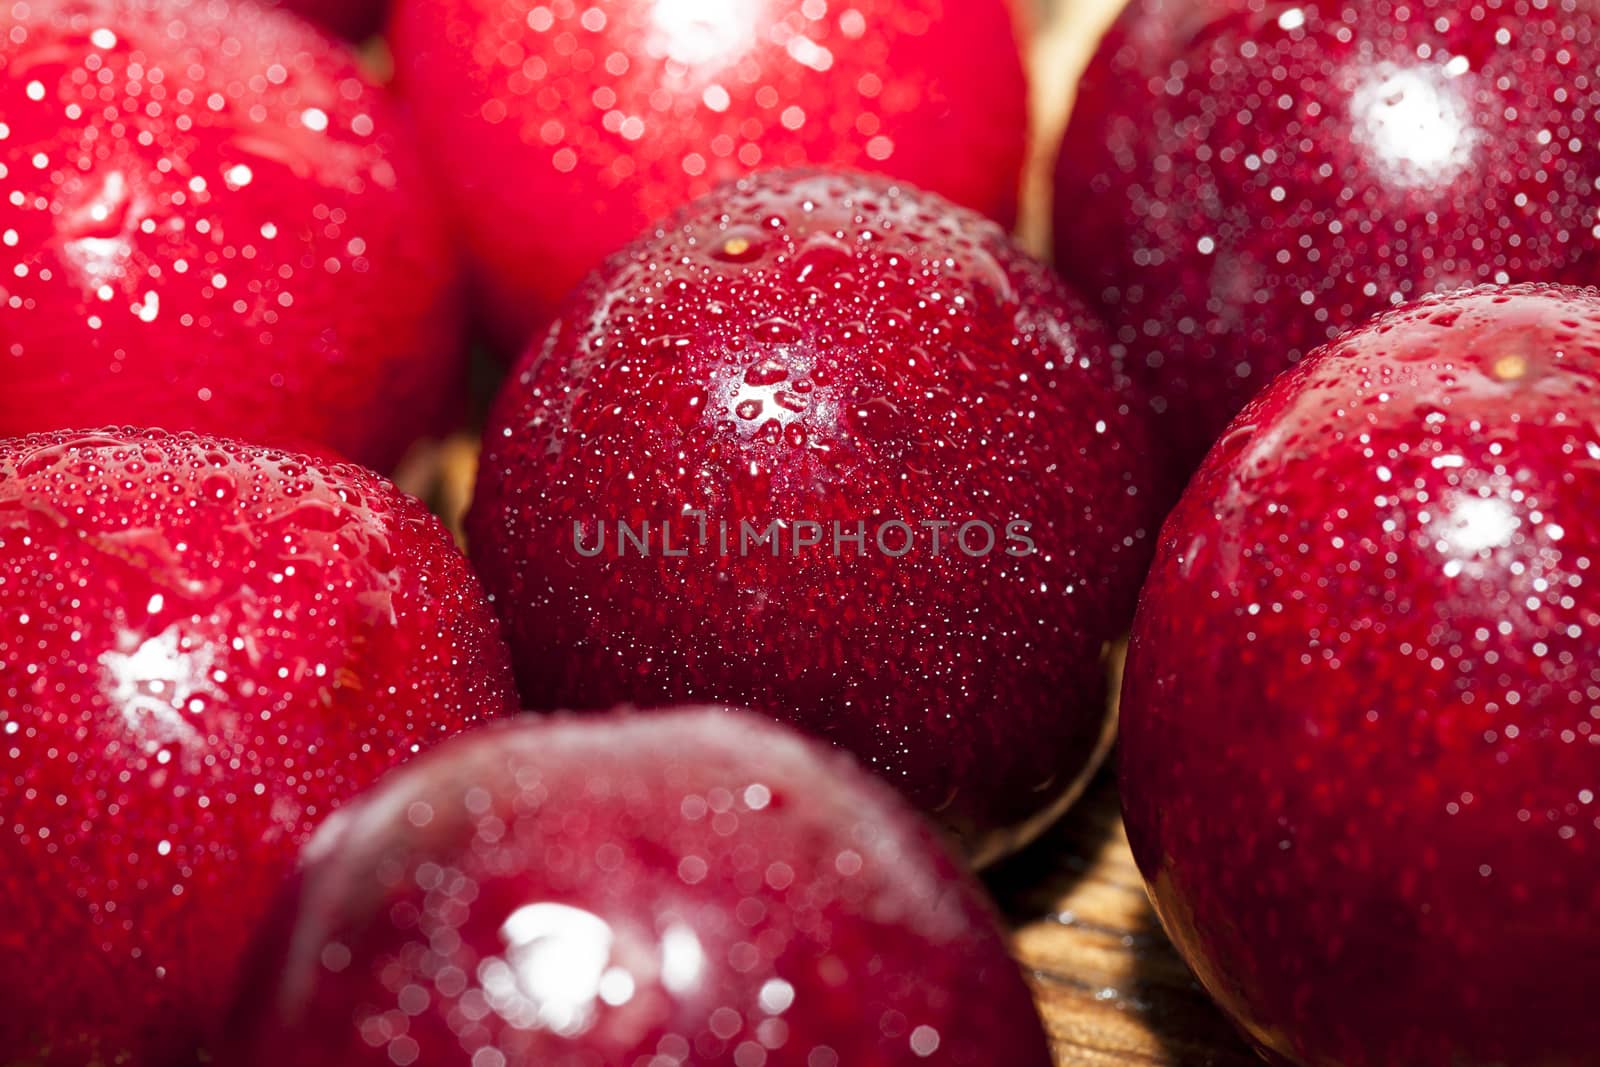 photographed close-up of ripe red cherries covered with water drops, shallow depth of field